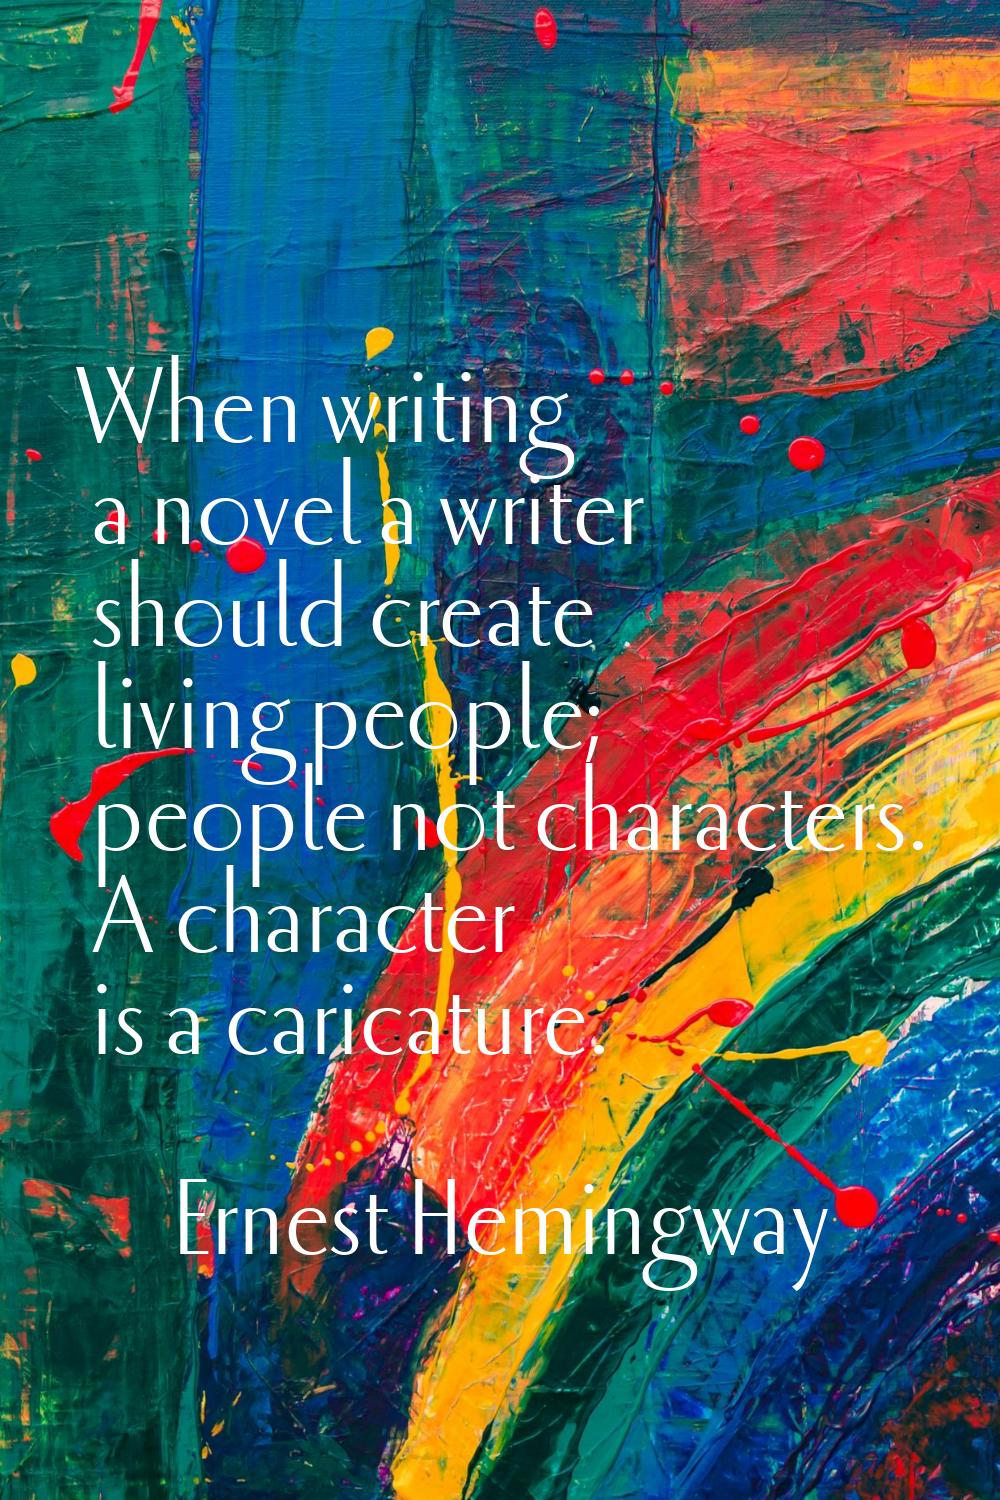 When writing a novel a writer should create living people; people not characters. A character is a 